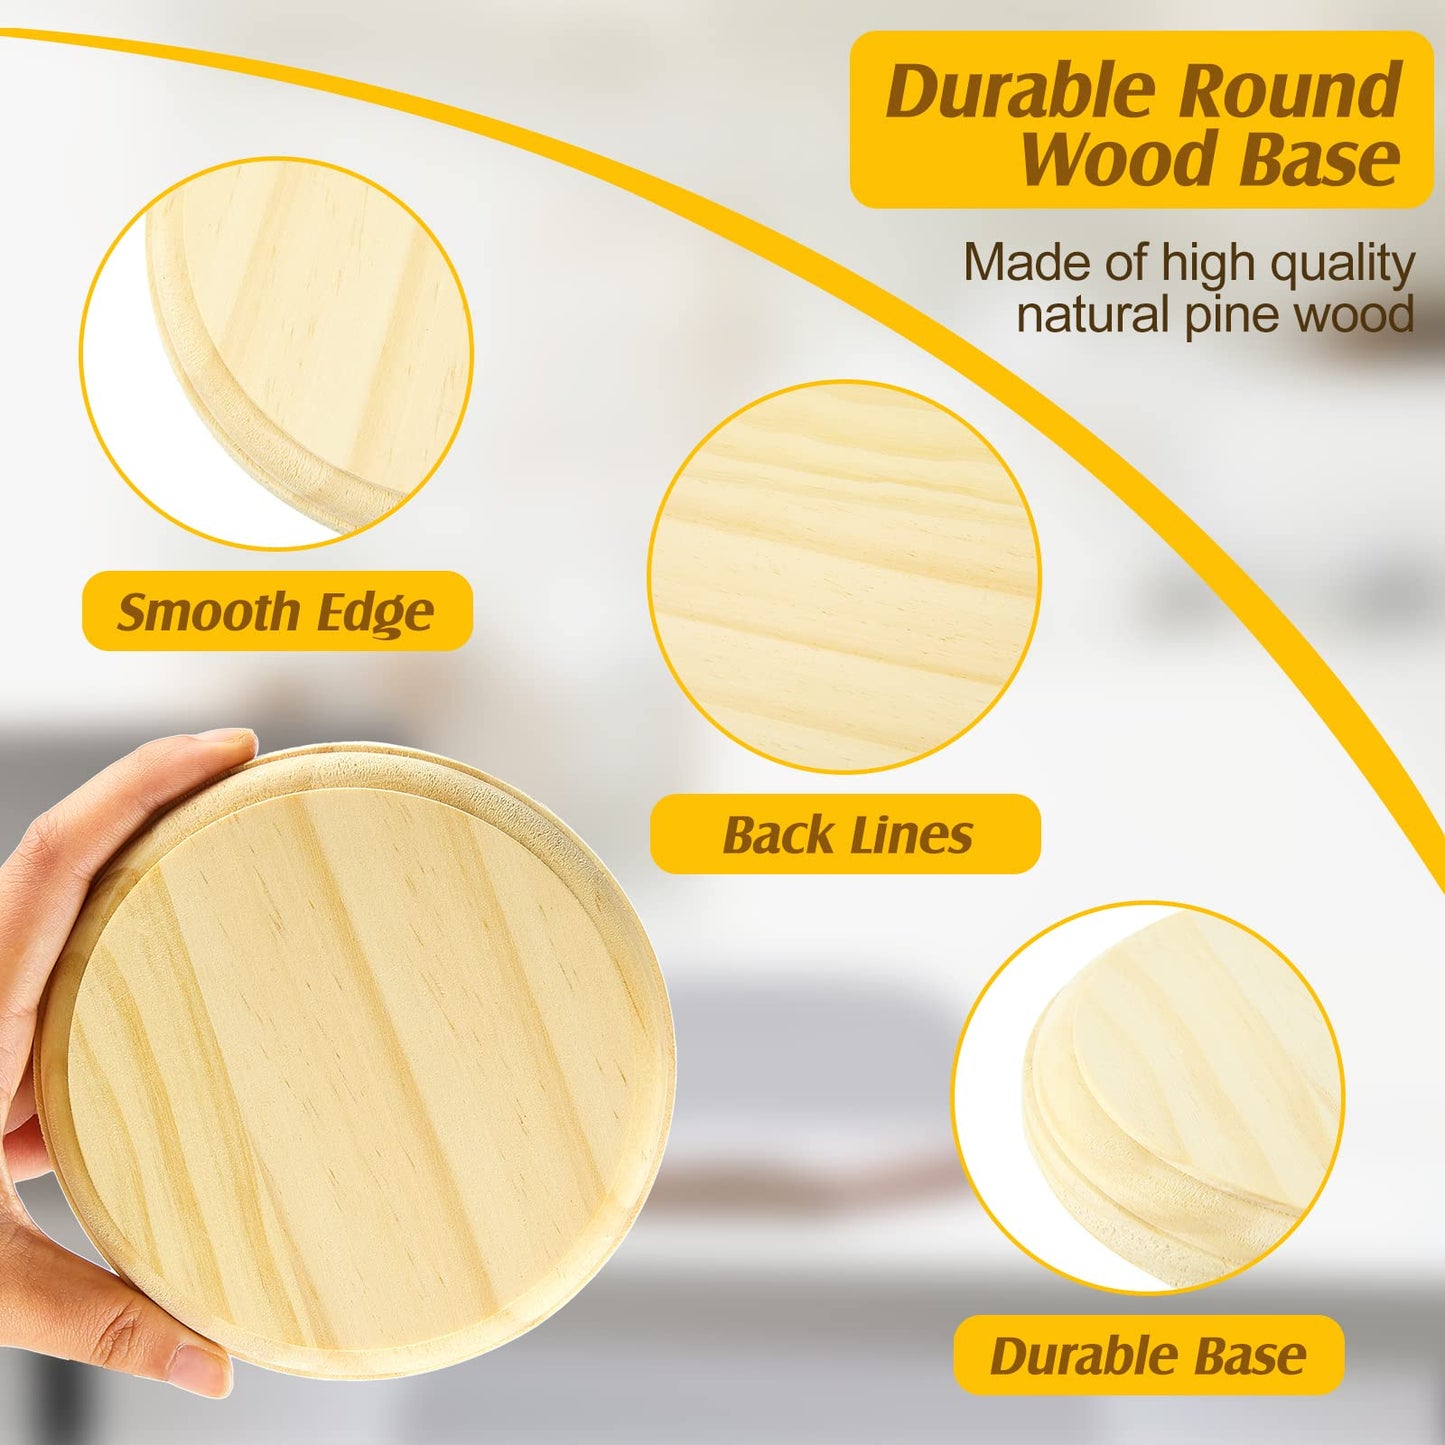 4 Pieces Round Wooden Plaque Wood Plaques for Crafts Unfinished Round Wood Base Display for Craft Projects Display DIY Painting Carving Home